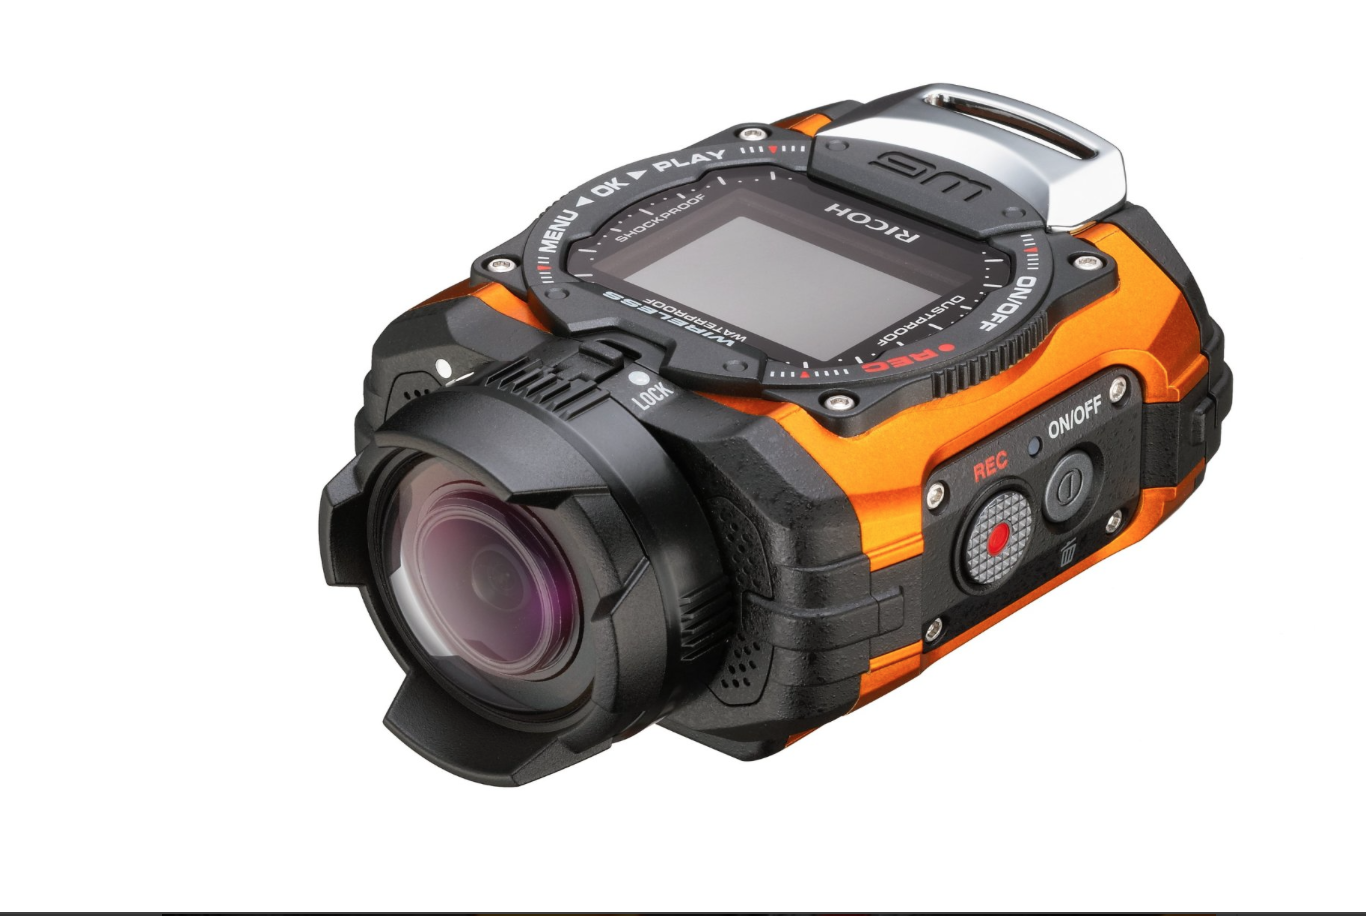 http://thedigitalstory.com/2015/11/10/ricoh-all-weather-cam.png